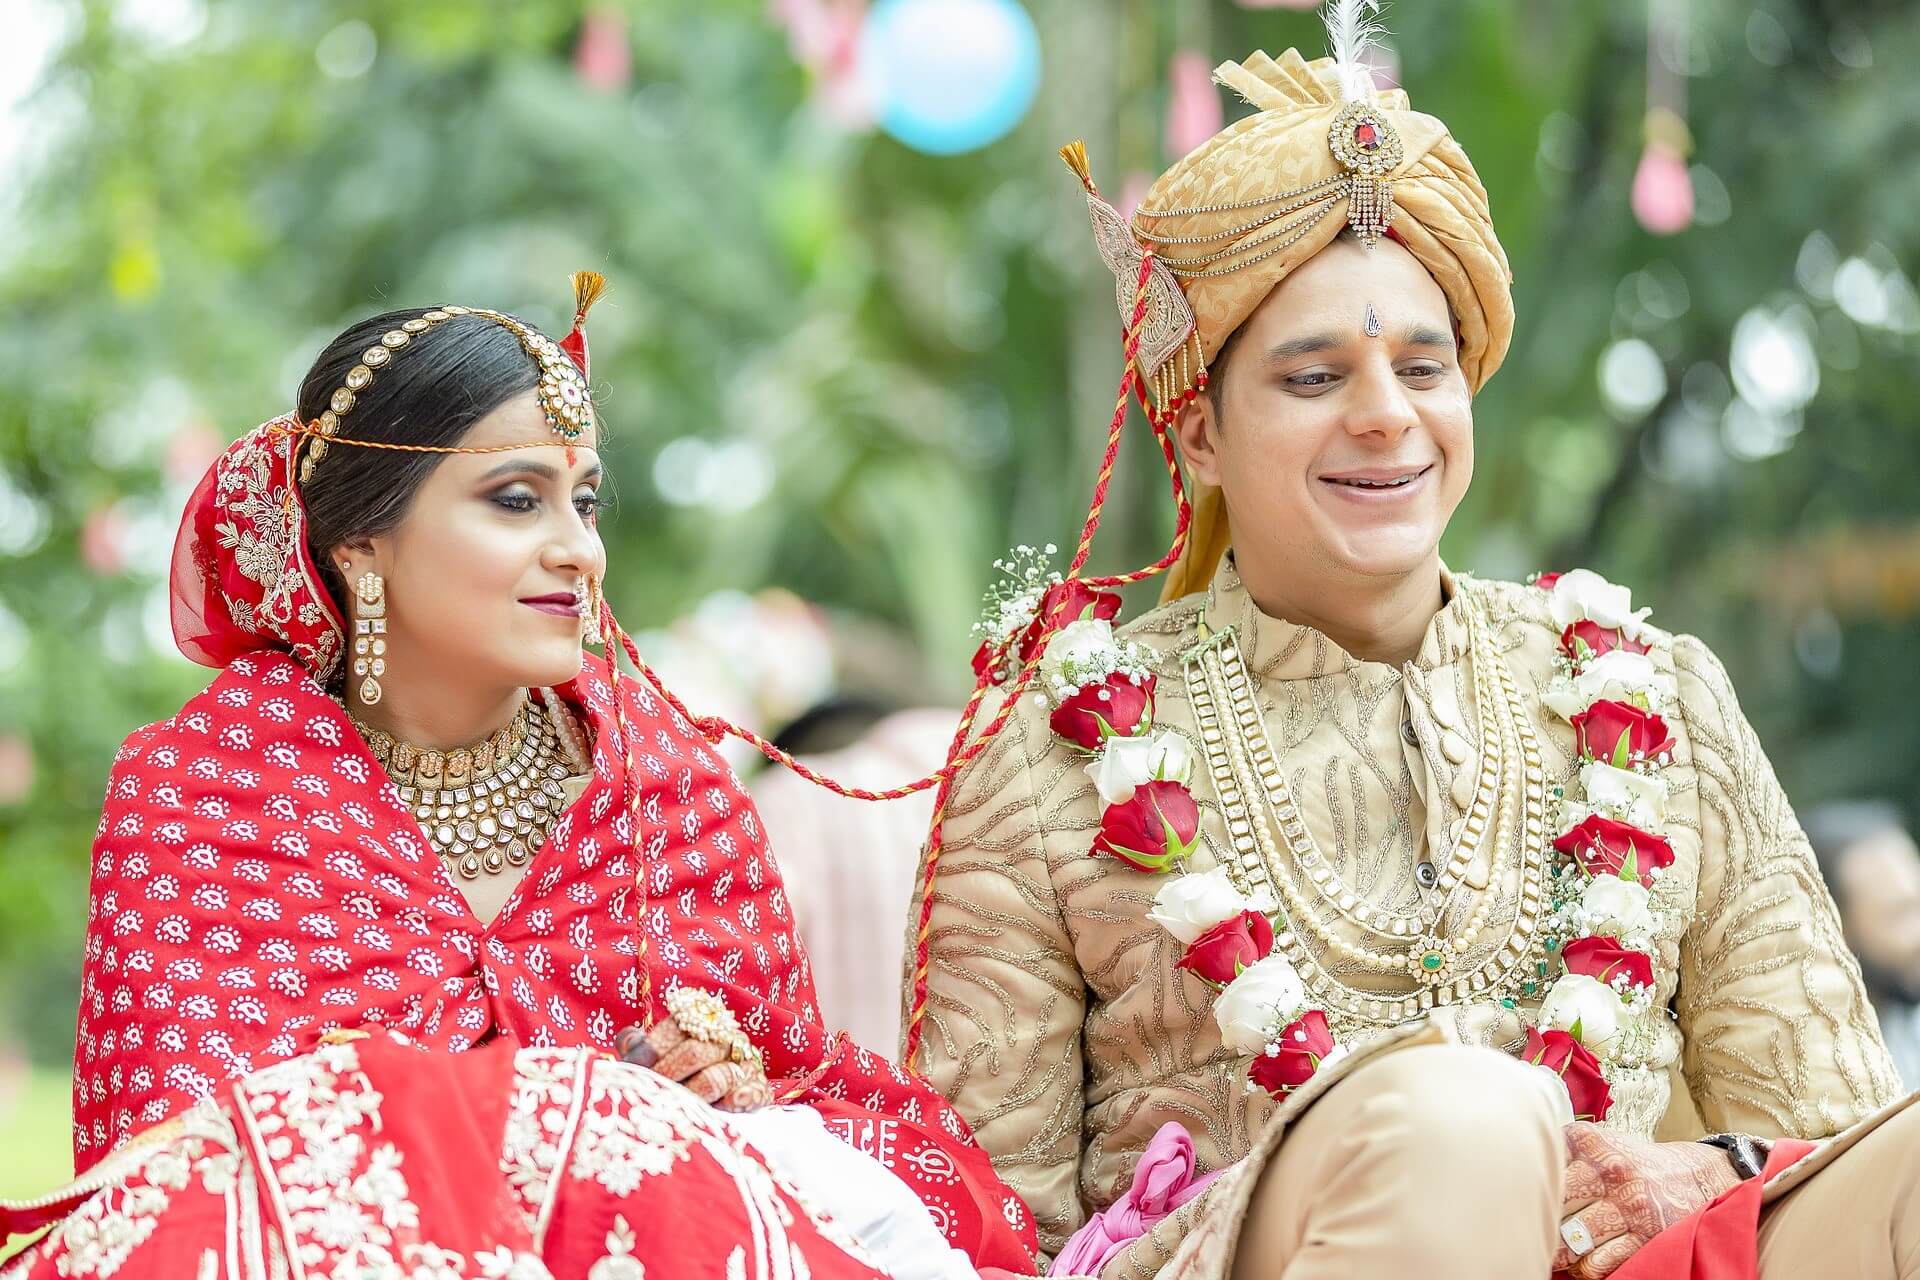 Indian bride and groom smiling in traditional attire